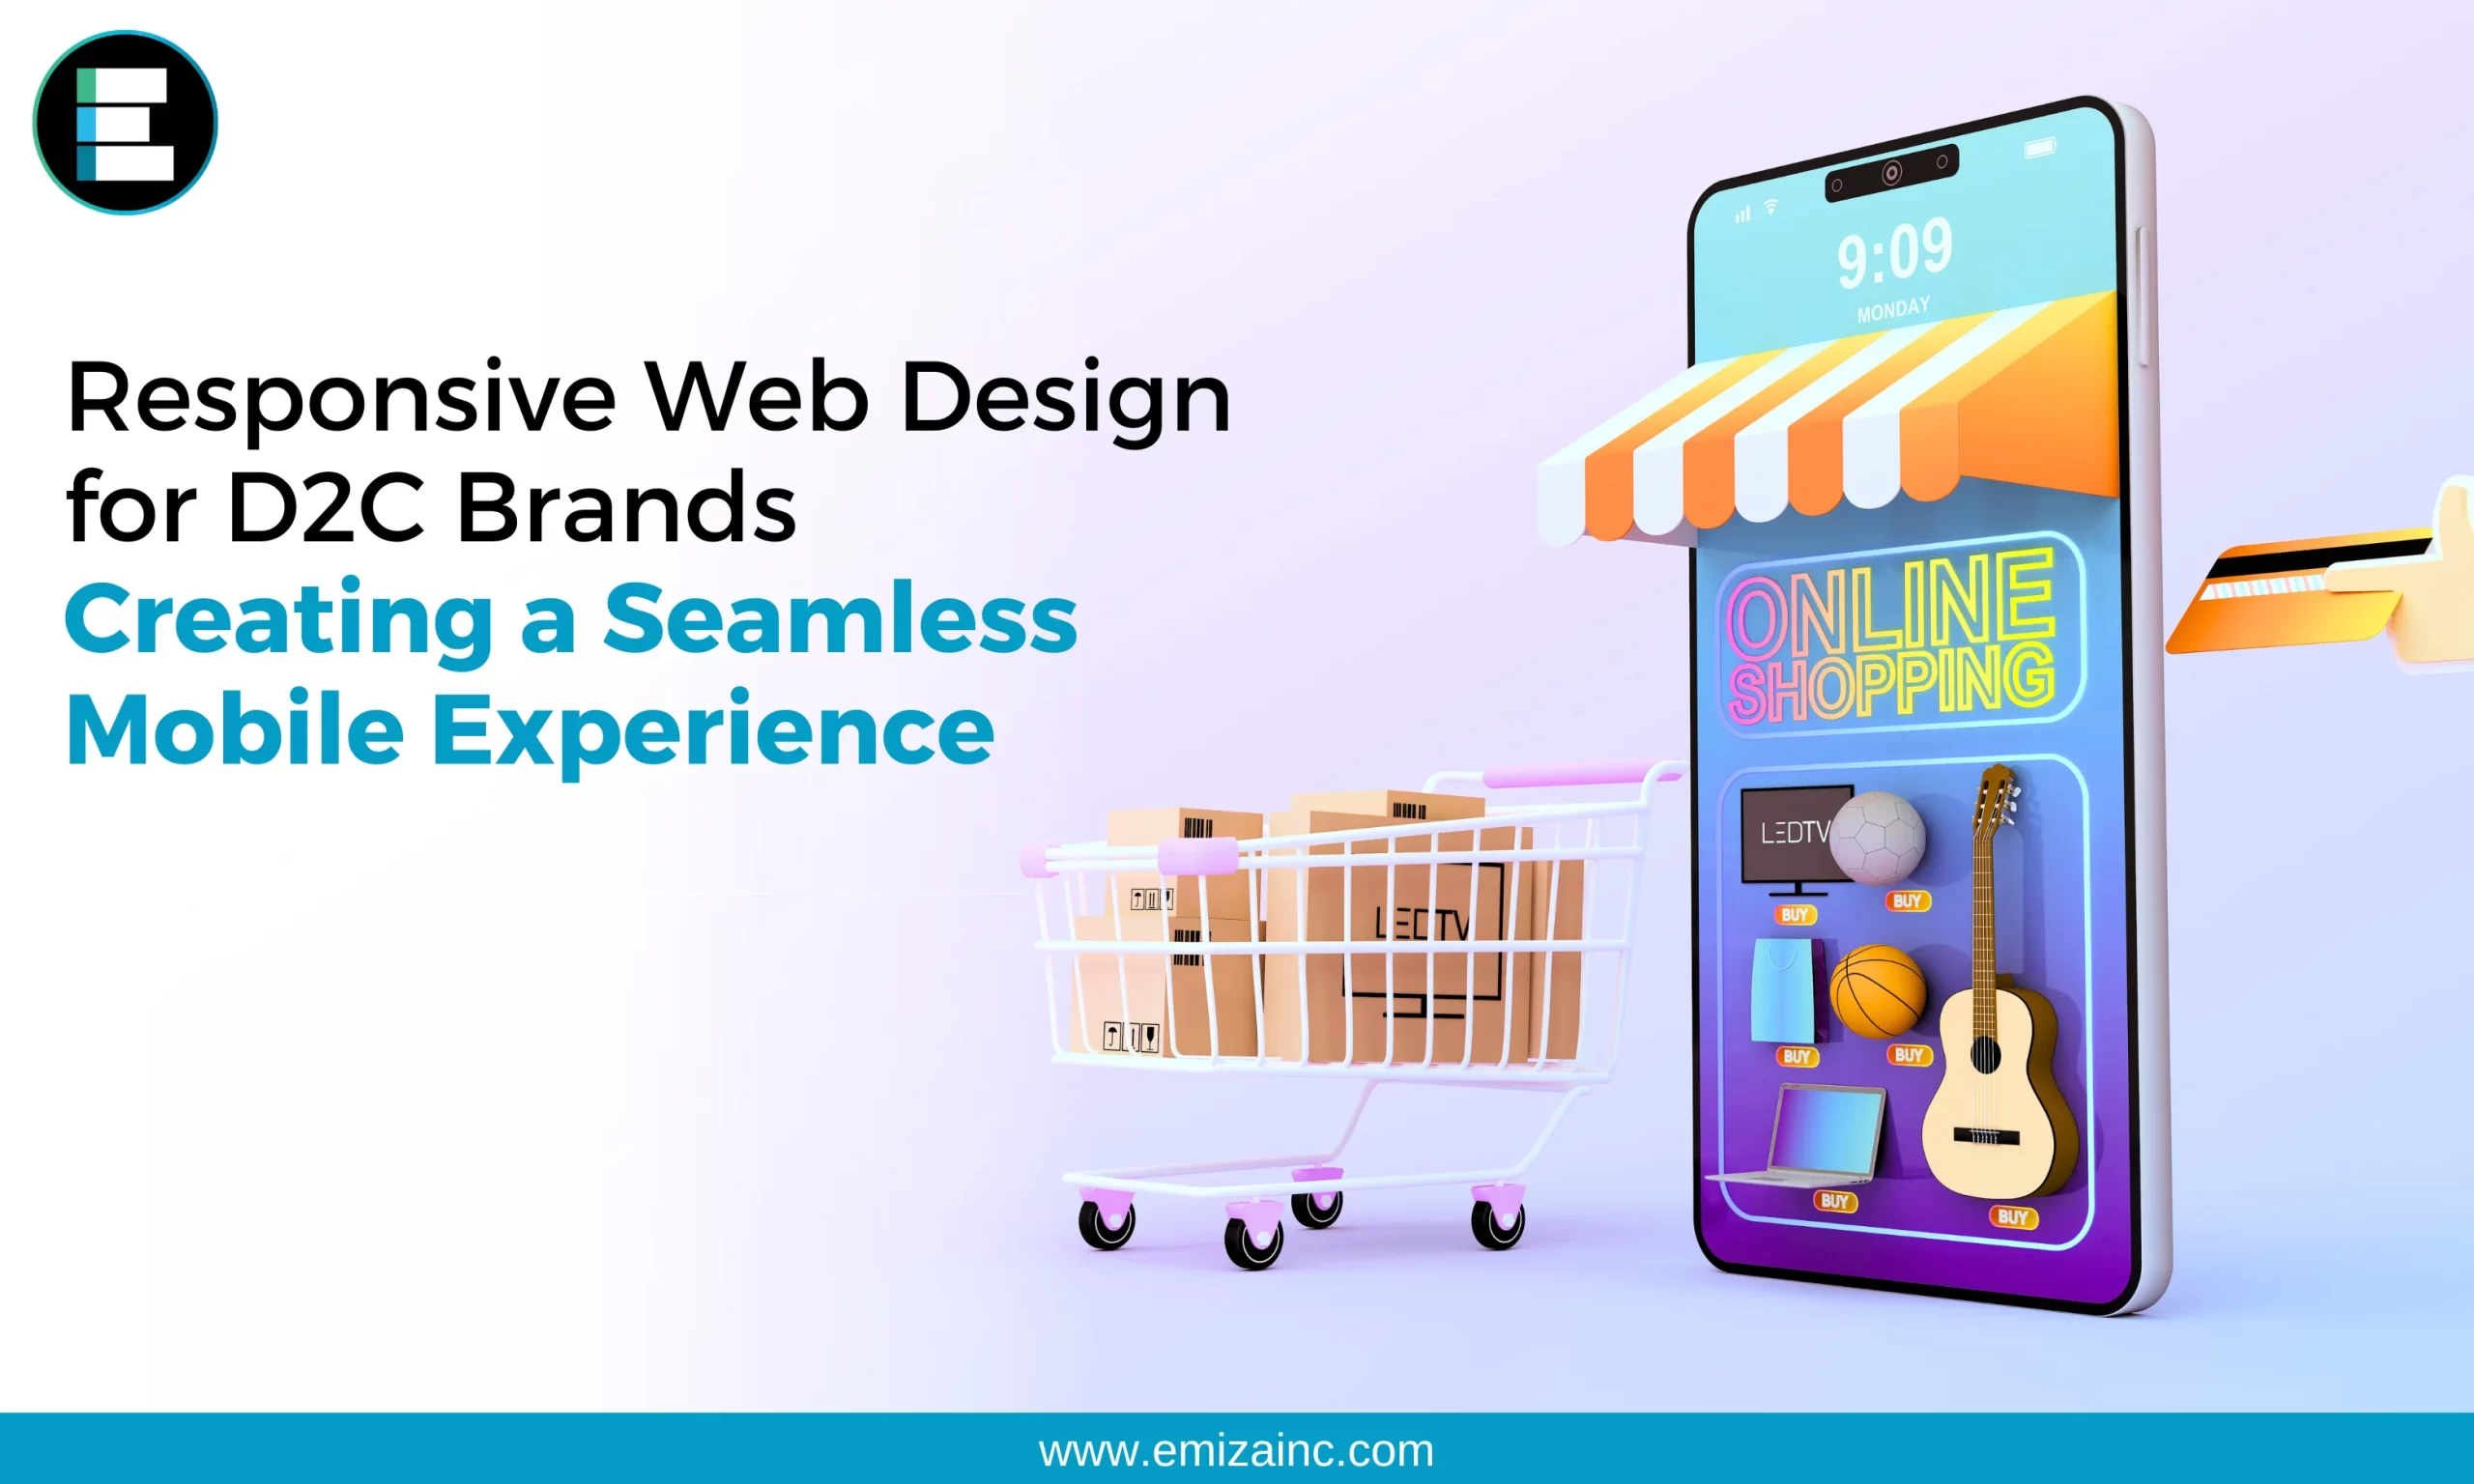 Responsive Web Design for D2C Brands: Creating a Seamless Mobile Experience